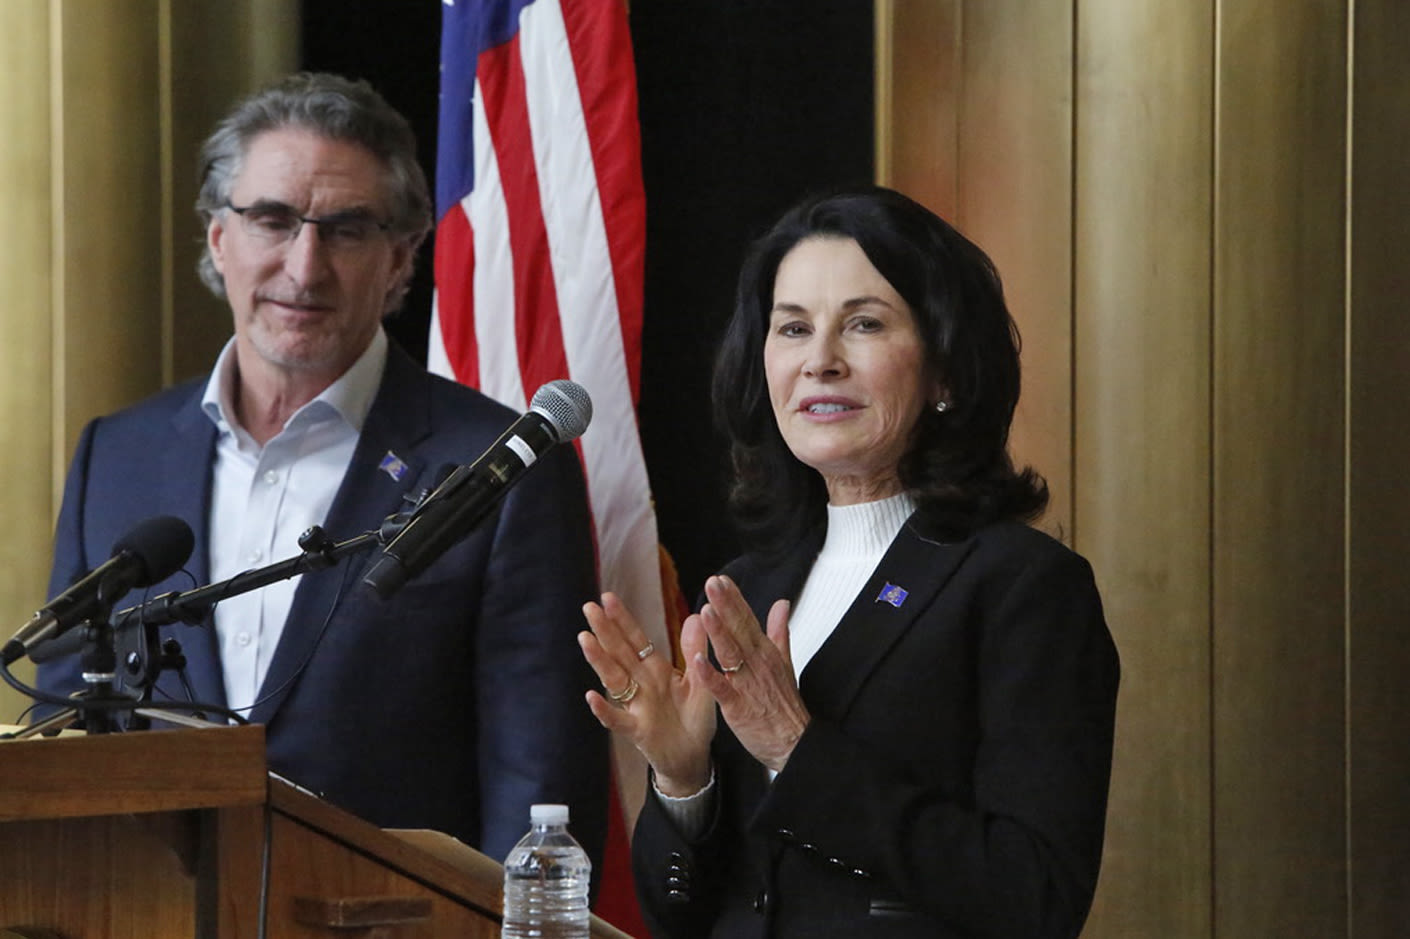 Port: It's weird that Doug Burgum hasn't donated any money to Tammy Miller's campaign